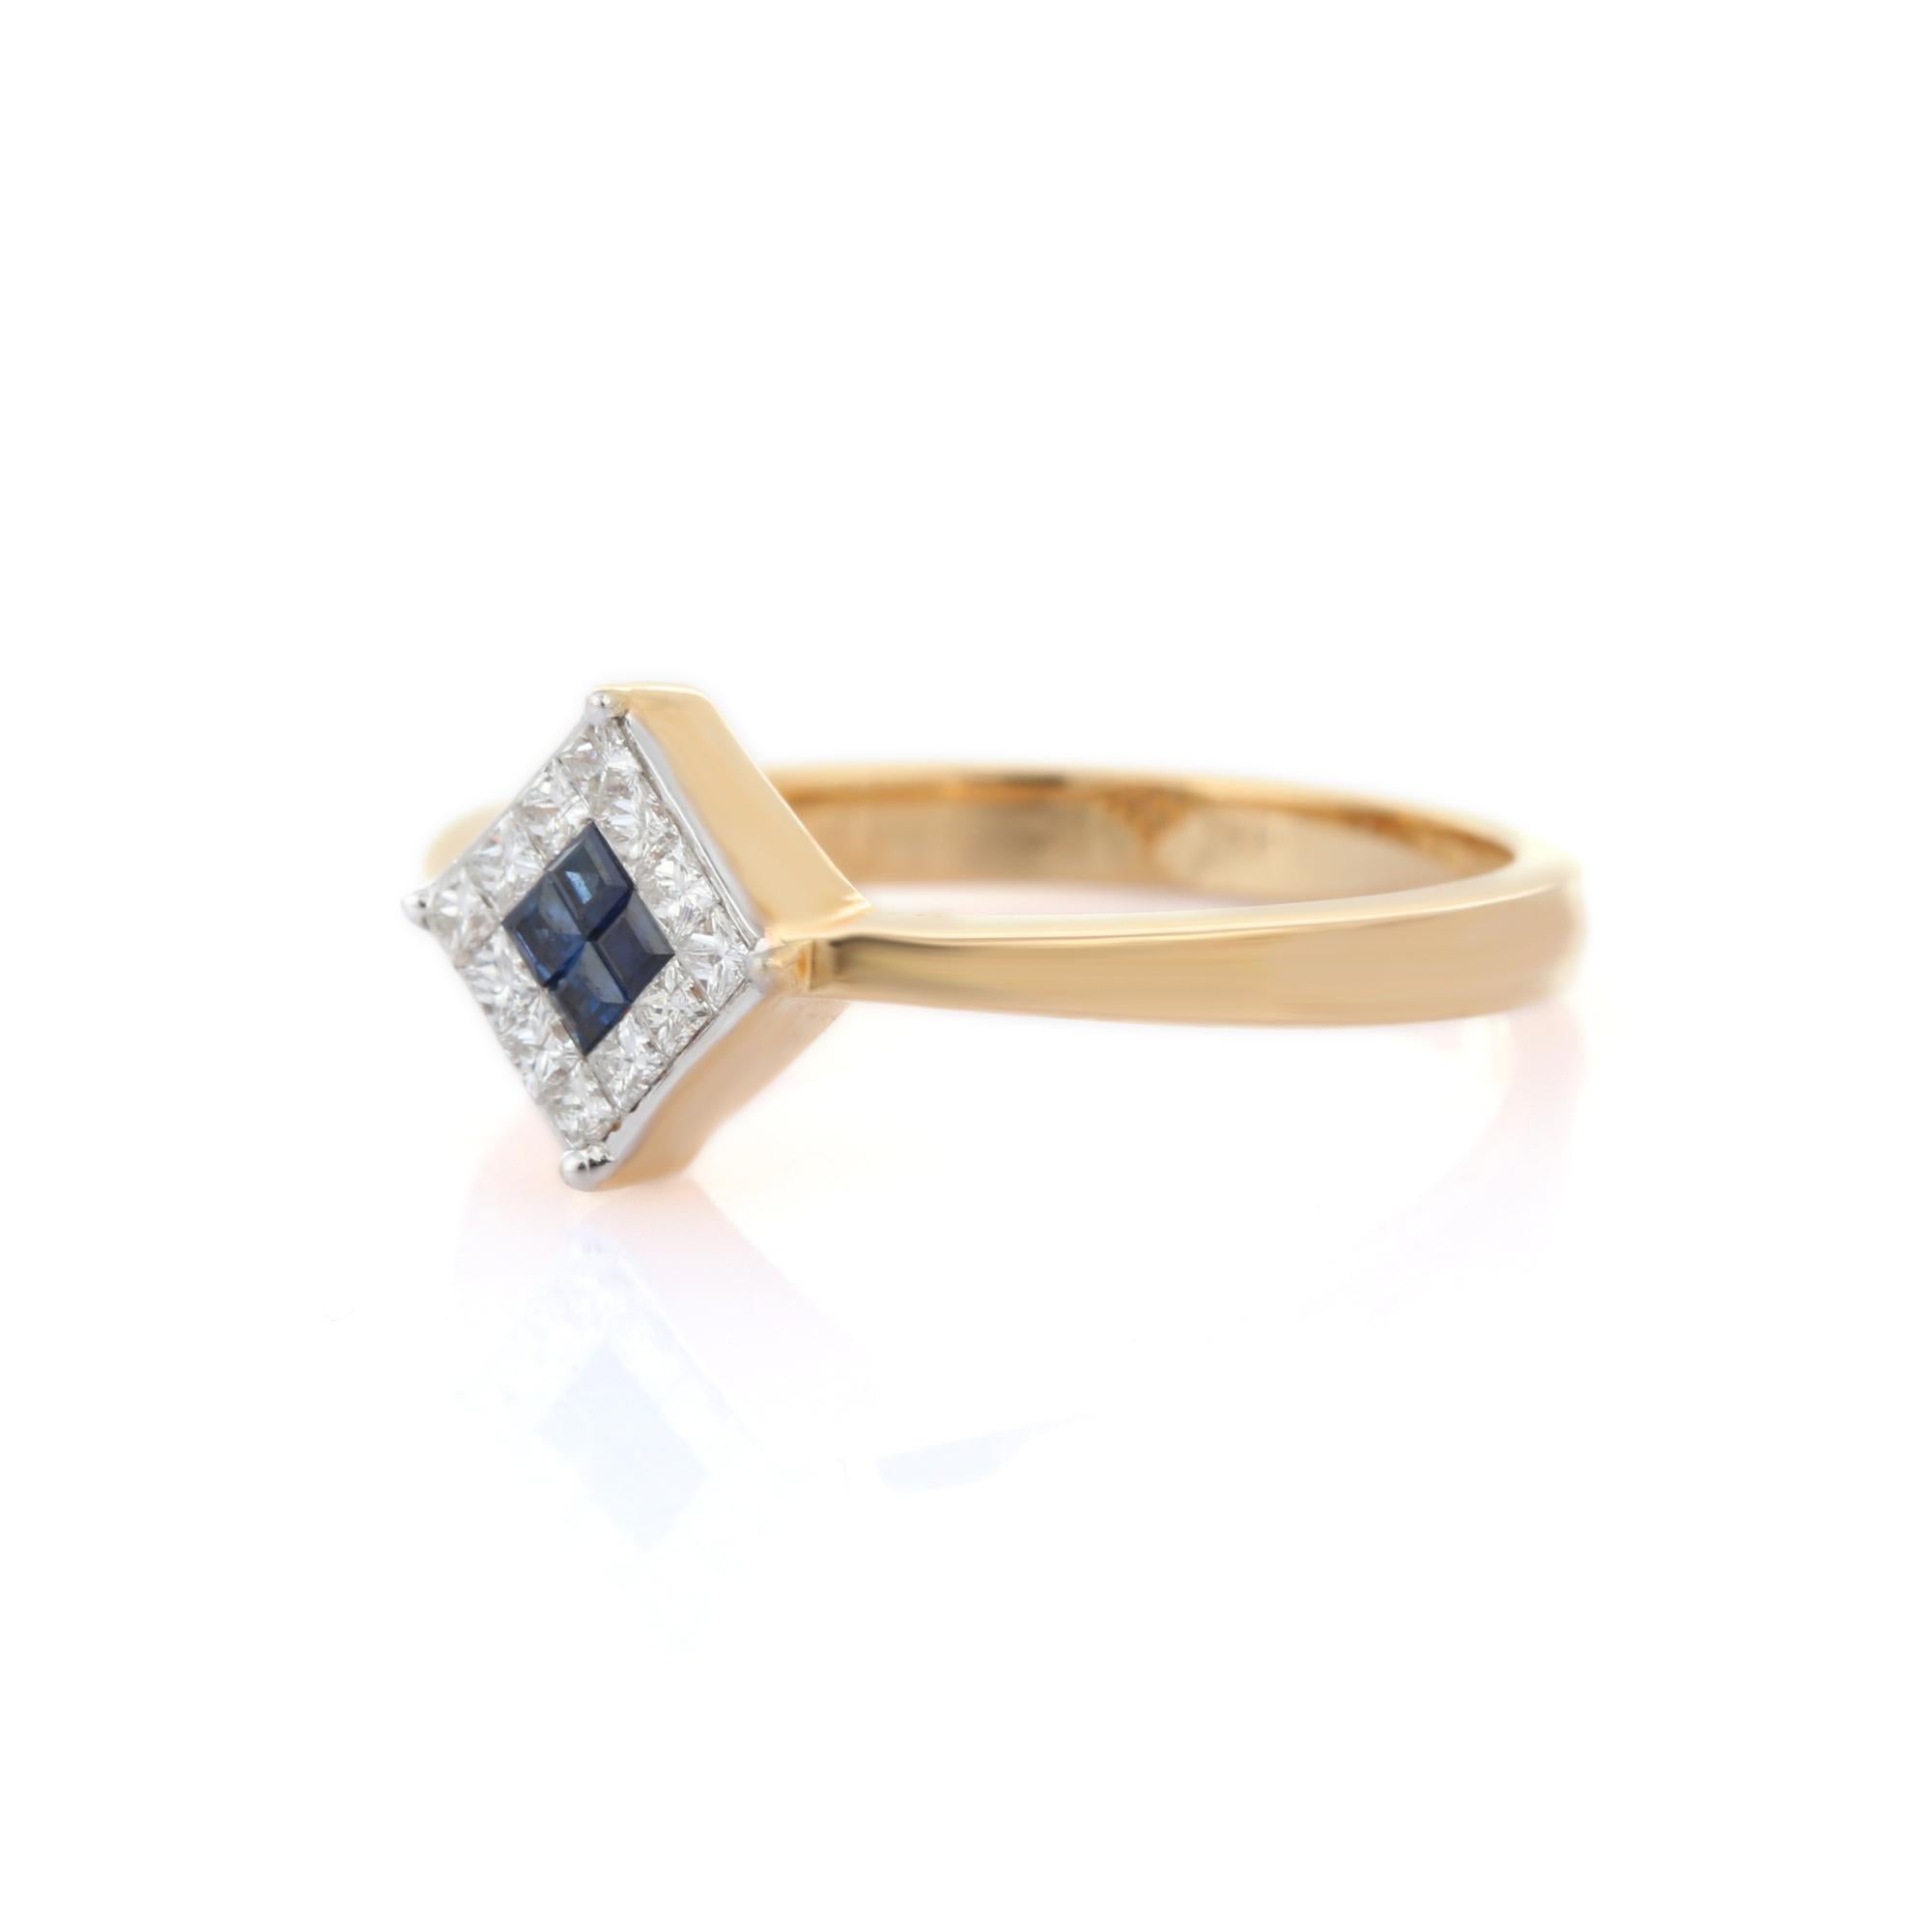 For Sale:  Natural Blue Sapphire Diamond Dainty Square Ring Set in 18k Solid Yellow Gold 4